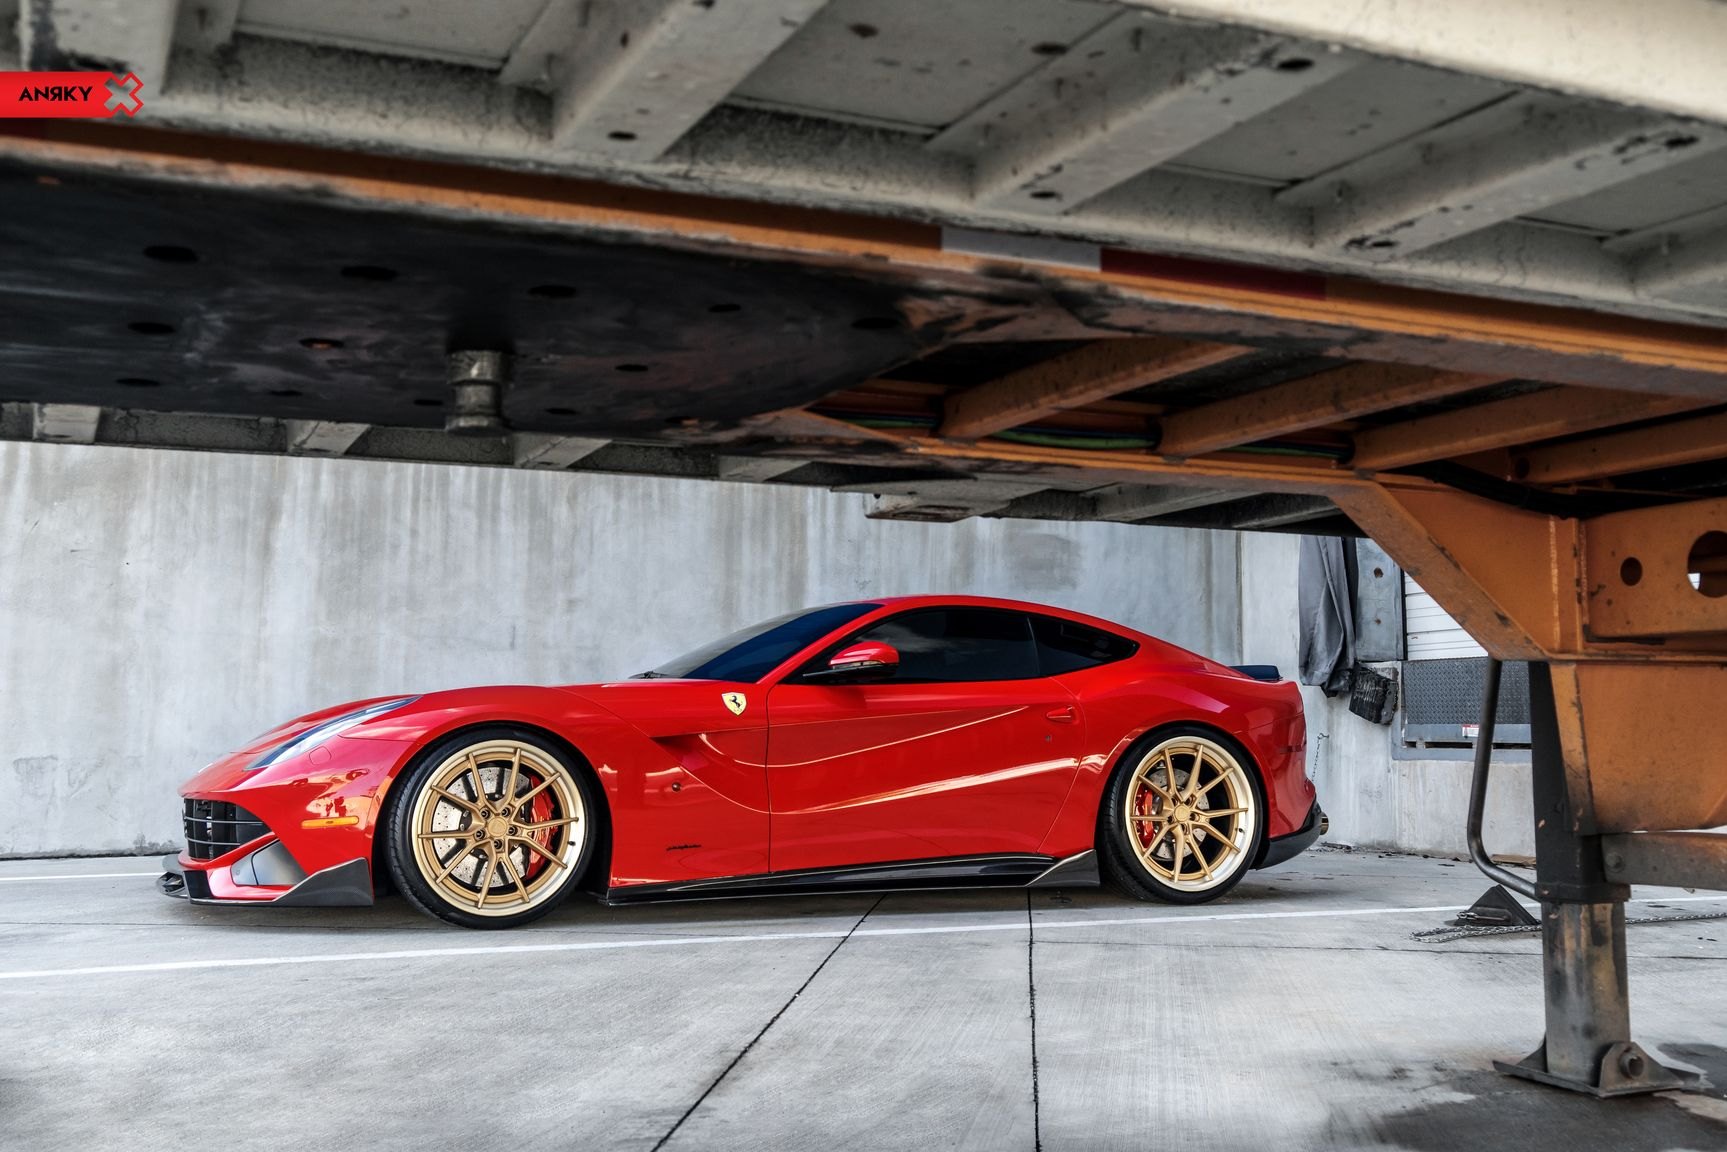 Anrky Rims with Red Brakes on Ferrari F12 - Photo by Anrky Wheels